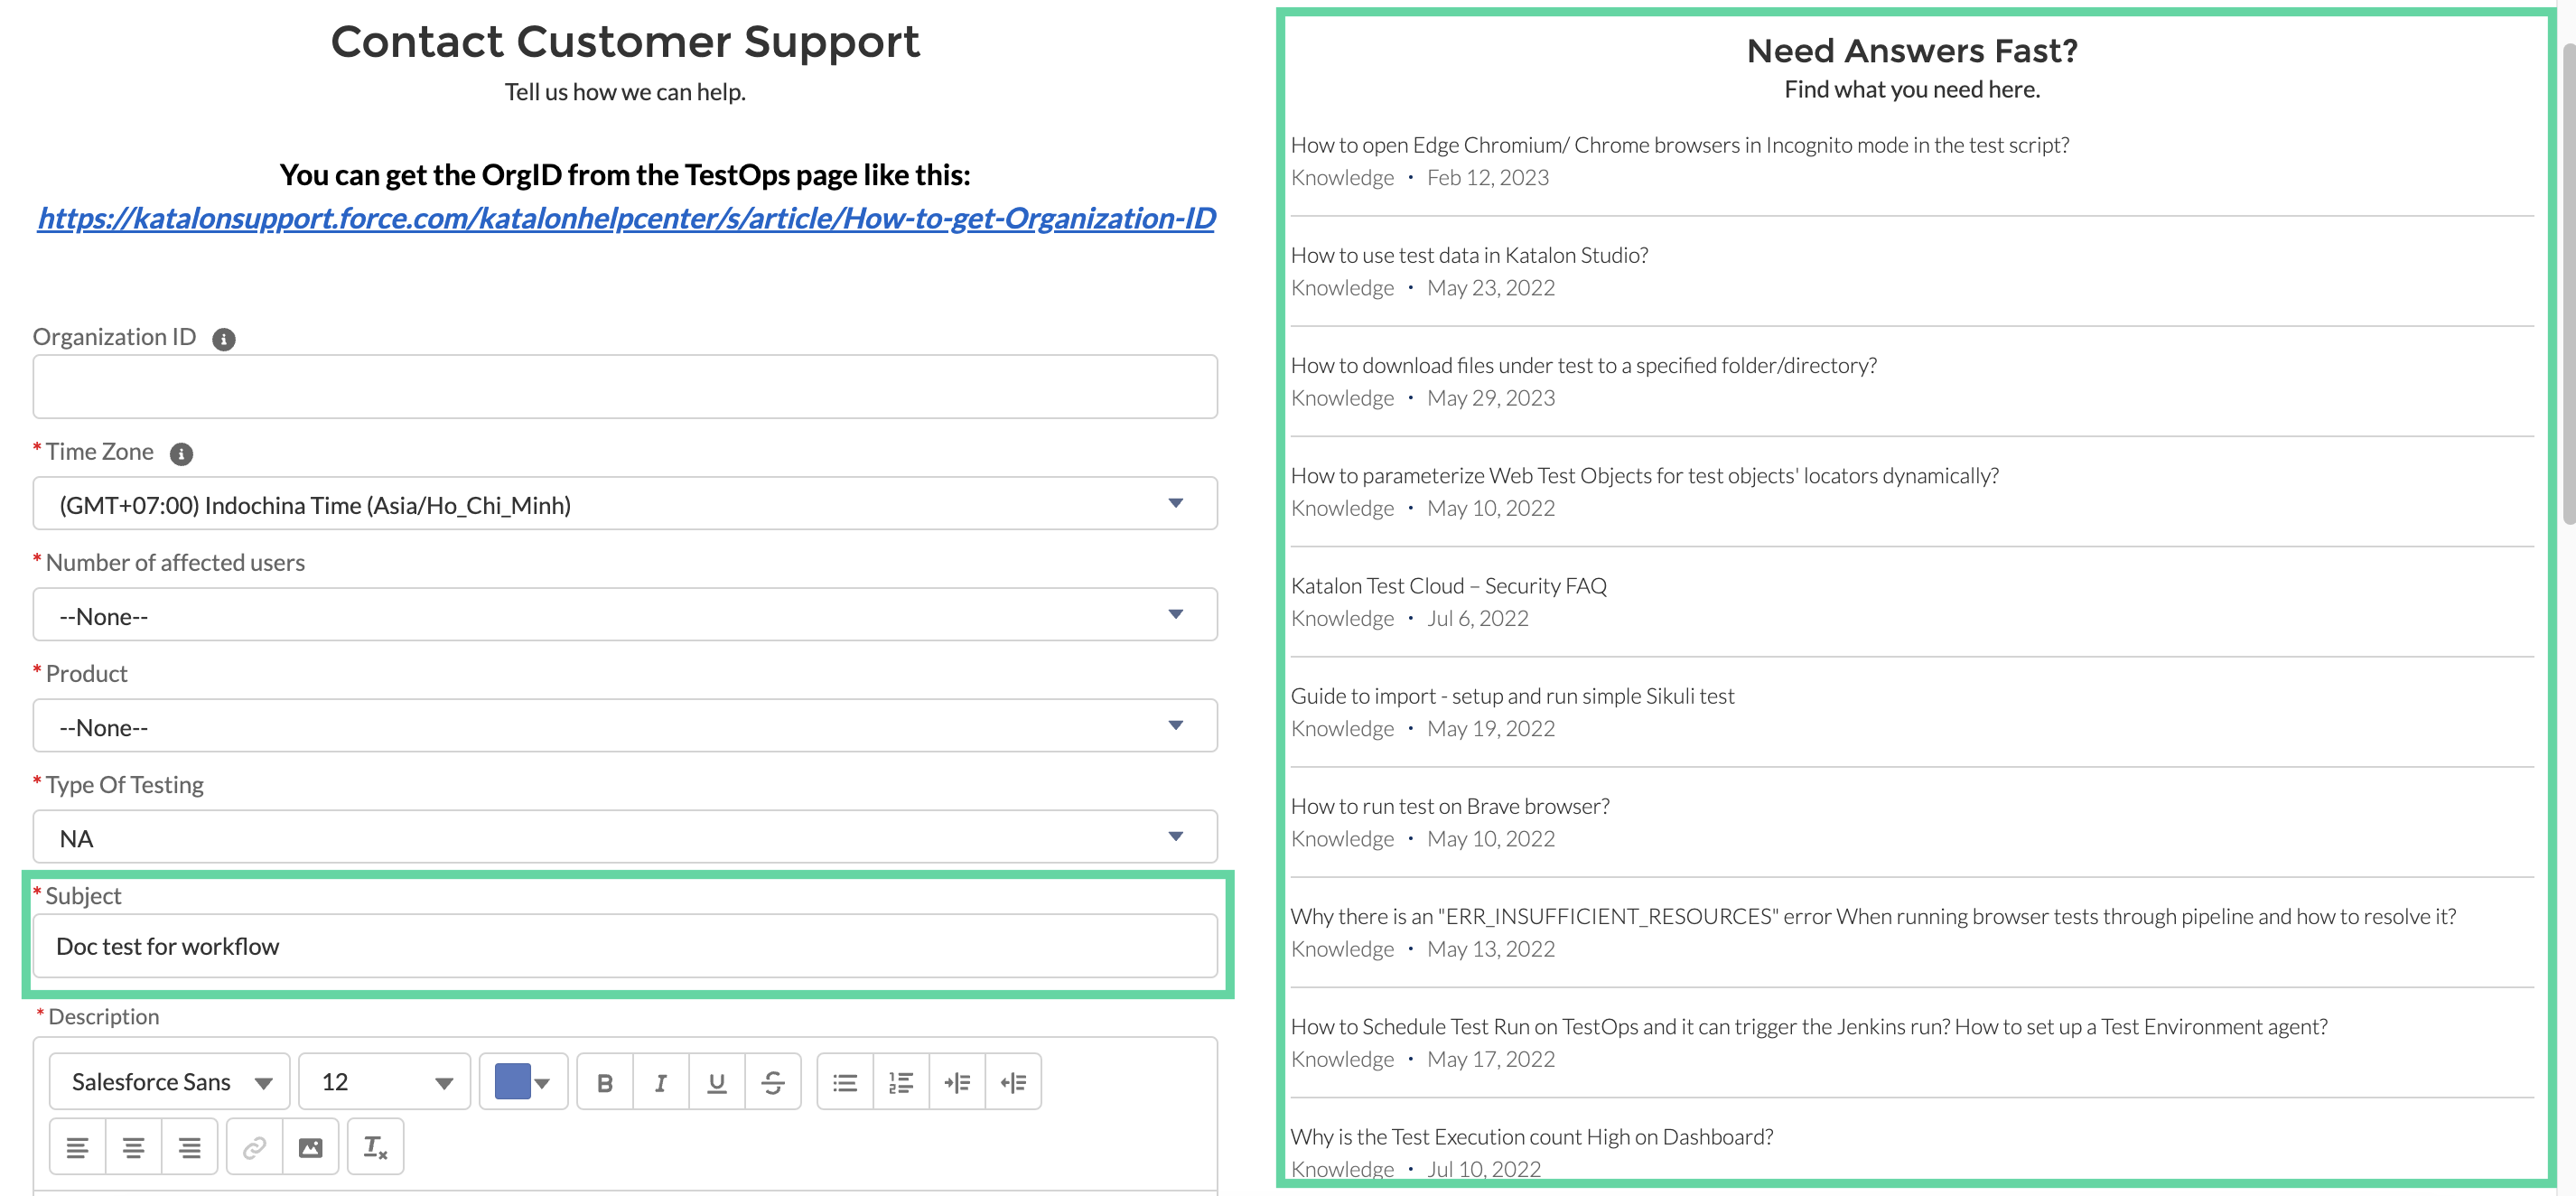 Type to search relevant Customer Support articles in Subject field.